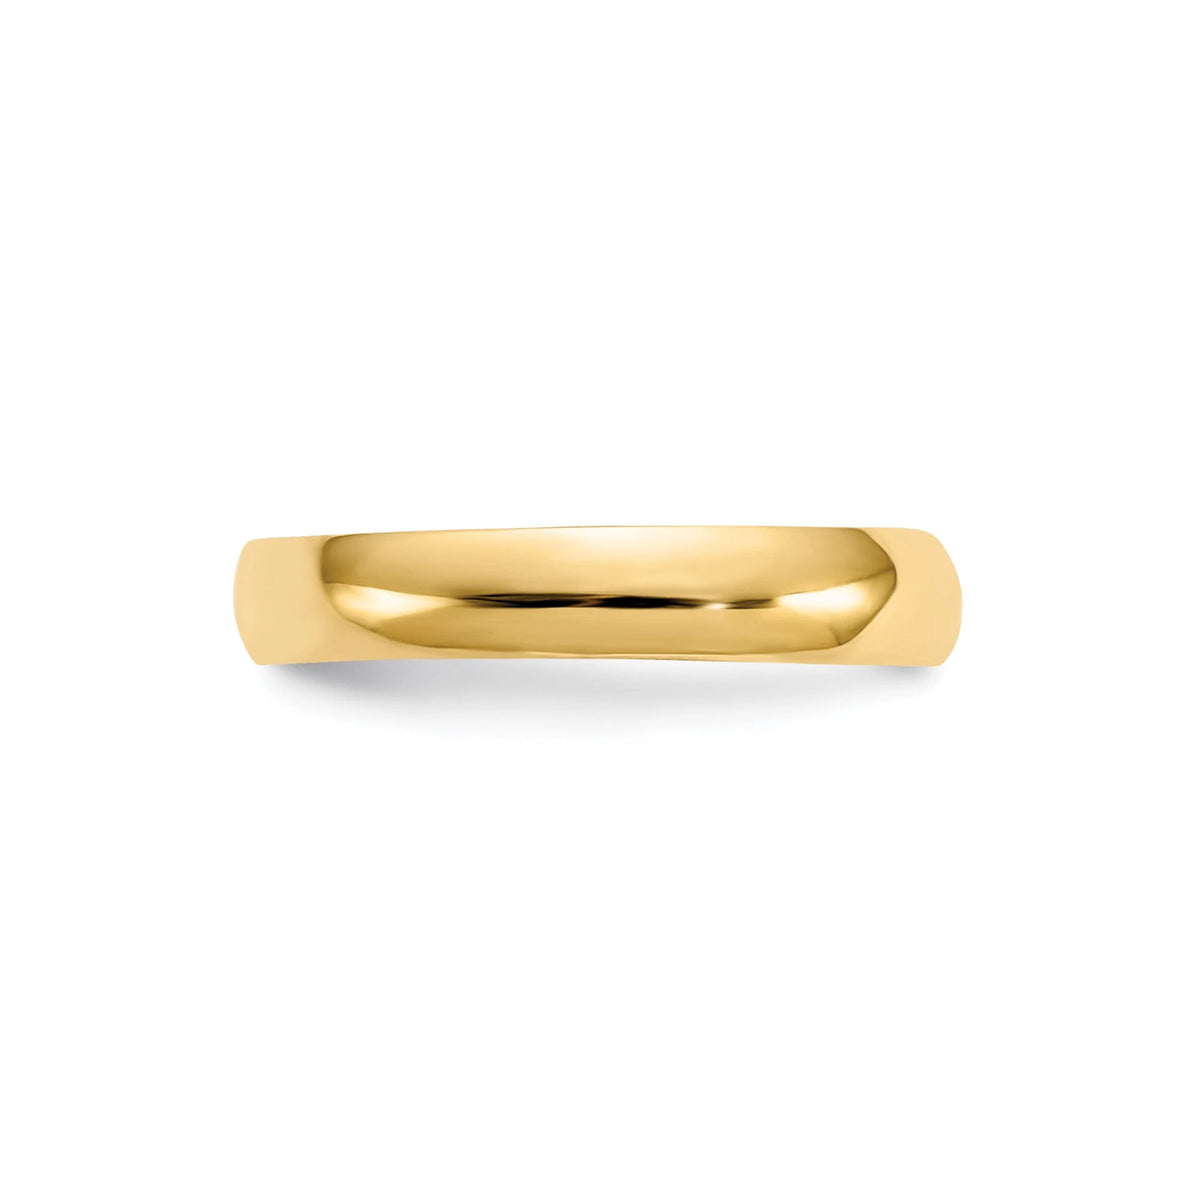 14k Yellow Gold Solid Toe Ring 3mm Band / 14k Toe band Gold / Adjustable Toe Ring in Gold /- Made in USA / Gift Box Included